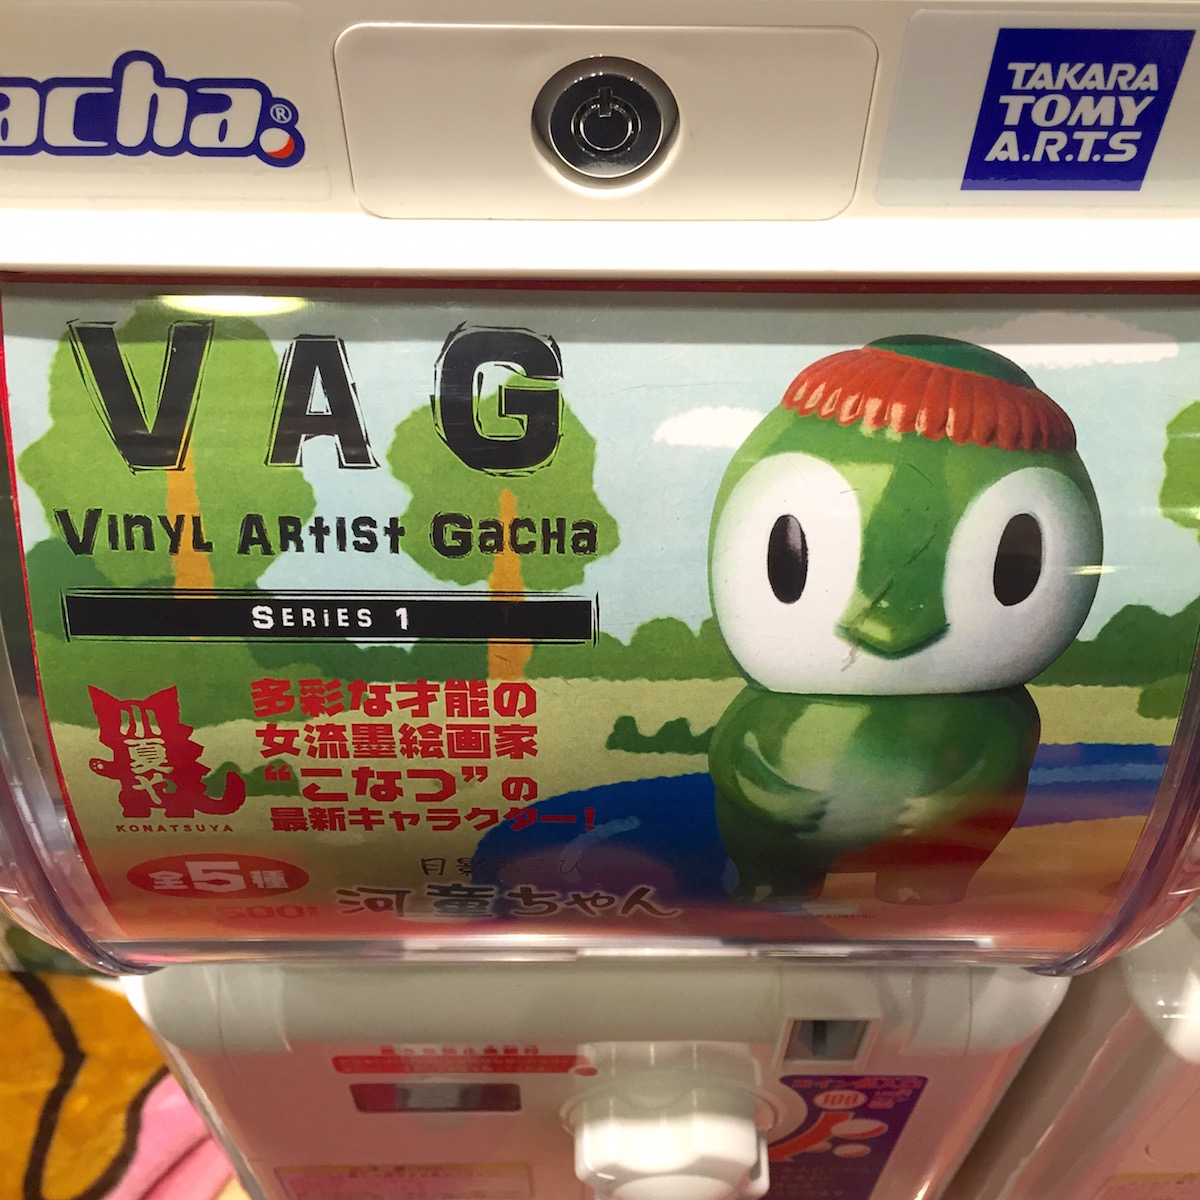 These Japanese Product Names Are So Bad They're Good – Wowsabi